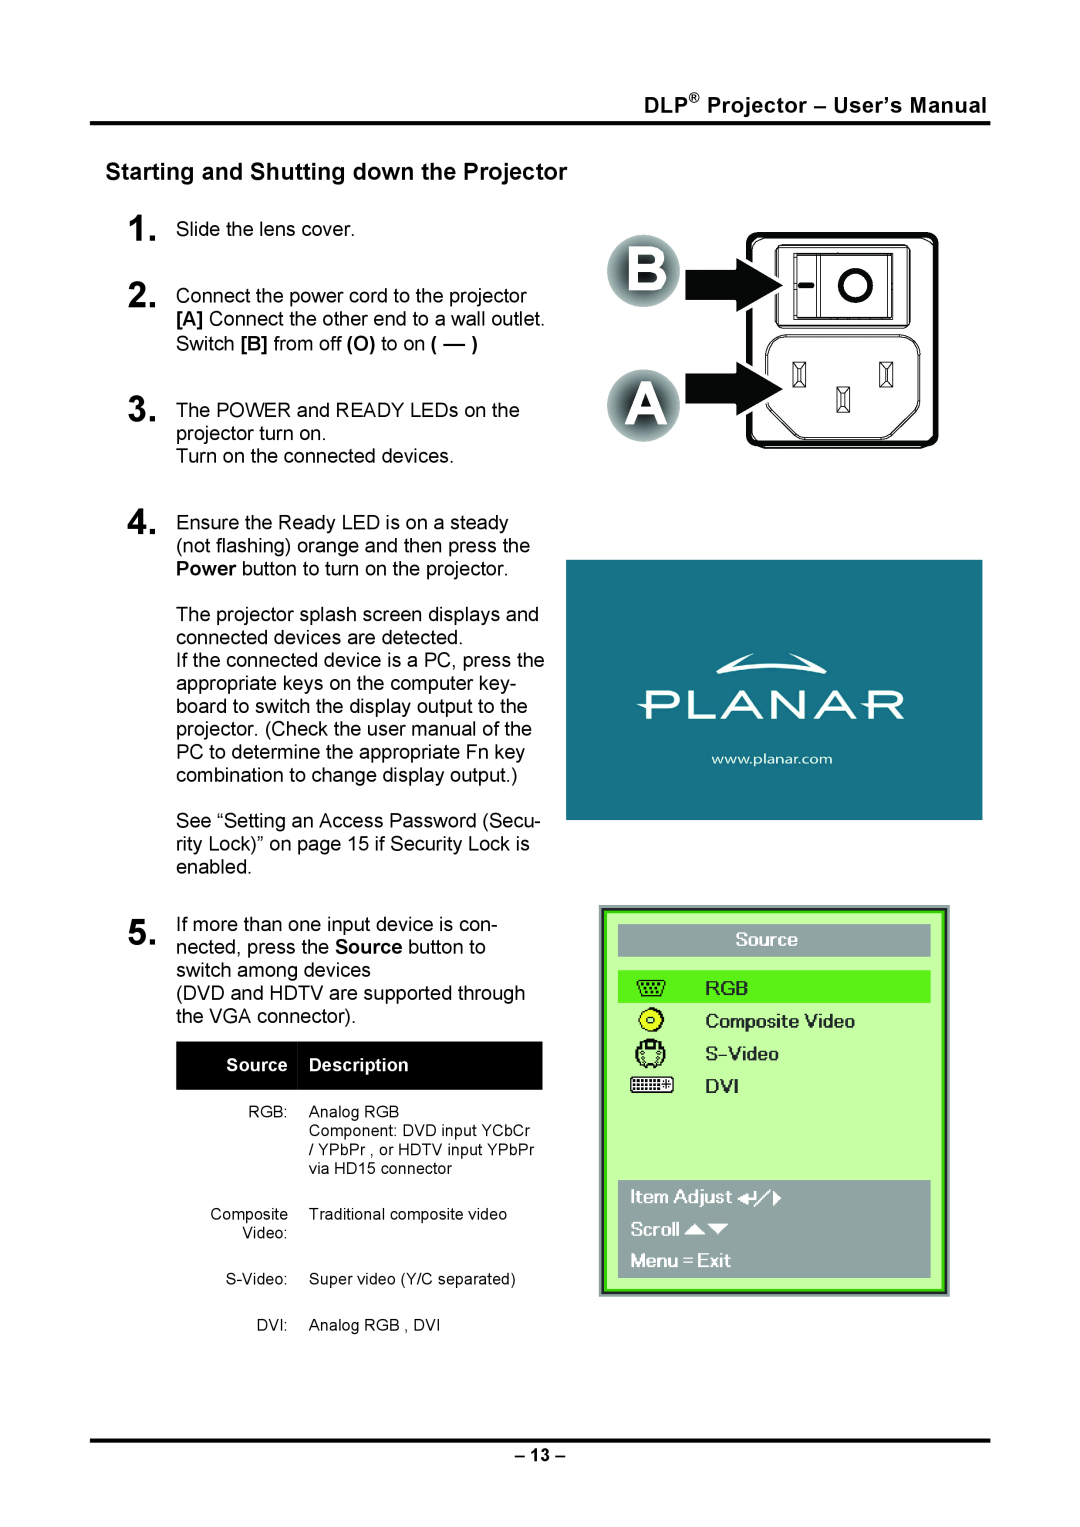 Planar PR5030 manual Starting and Shutting down the Projector, DLP Projector - User’s Manual 